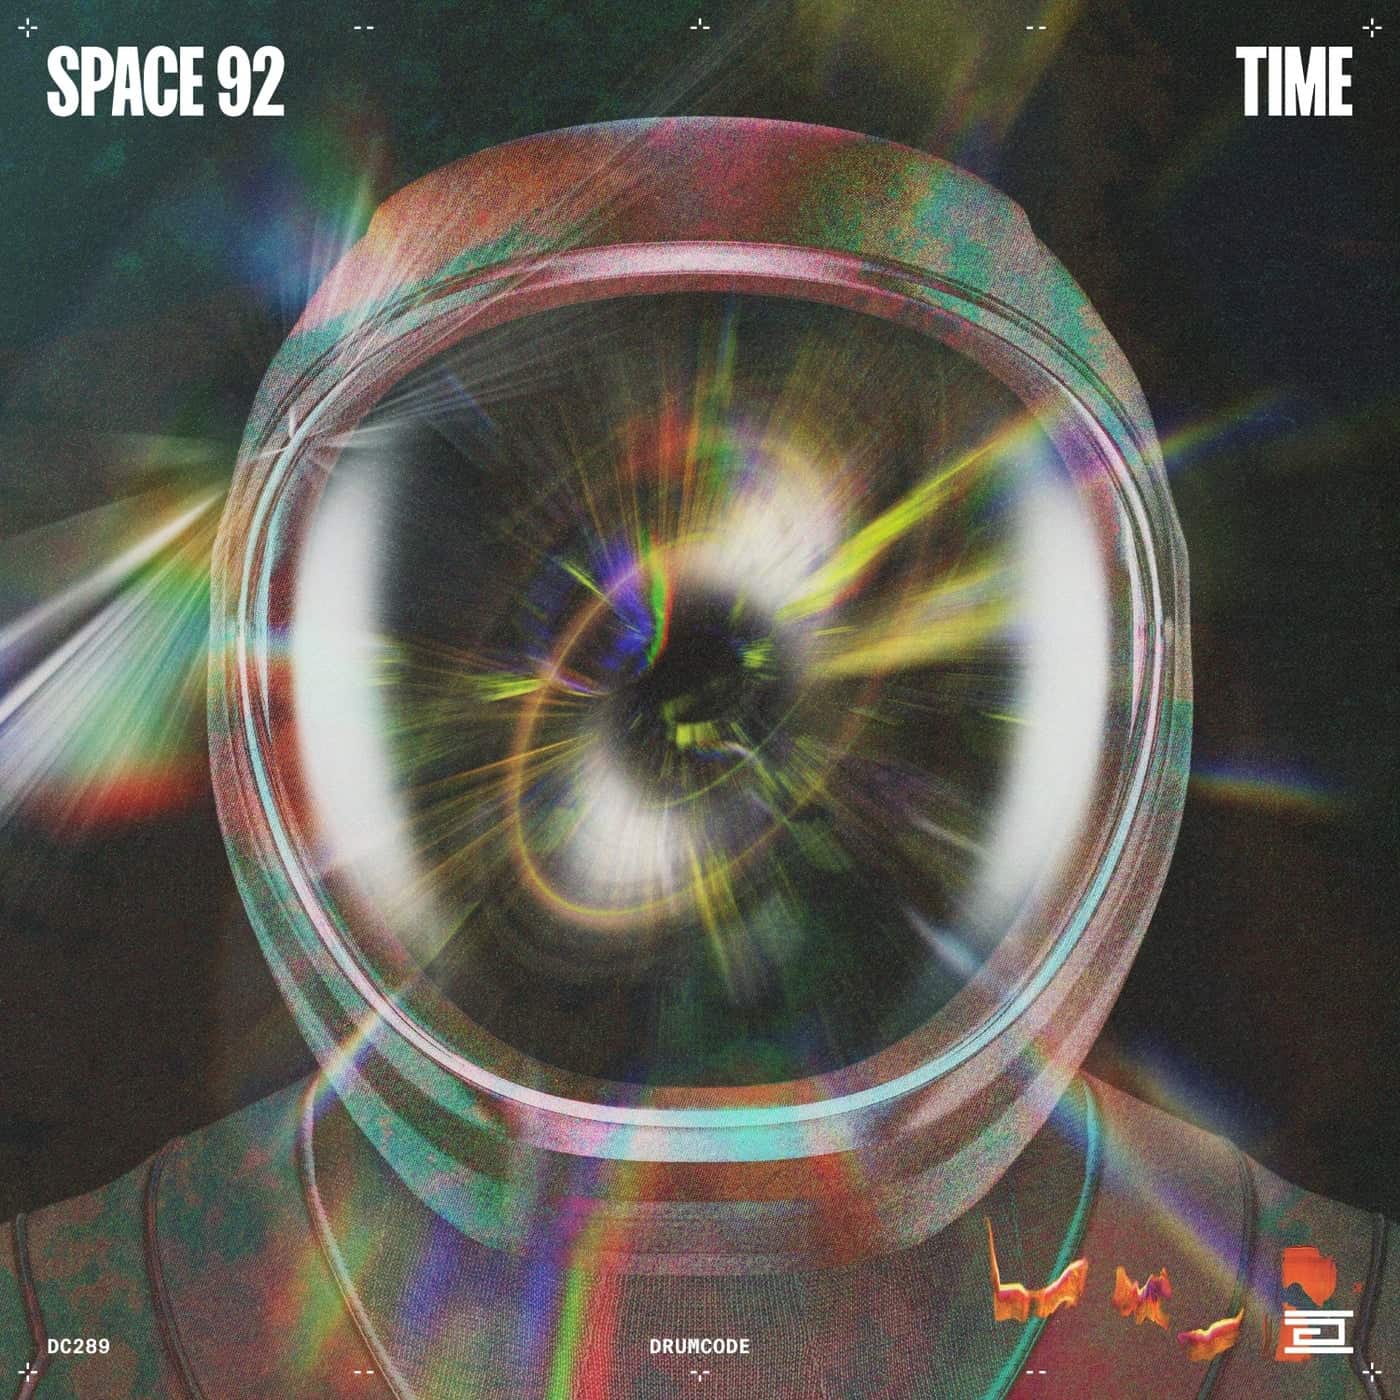 image cover: Time by Space 92 on Drumcode